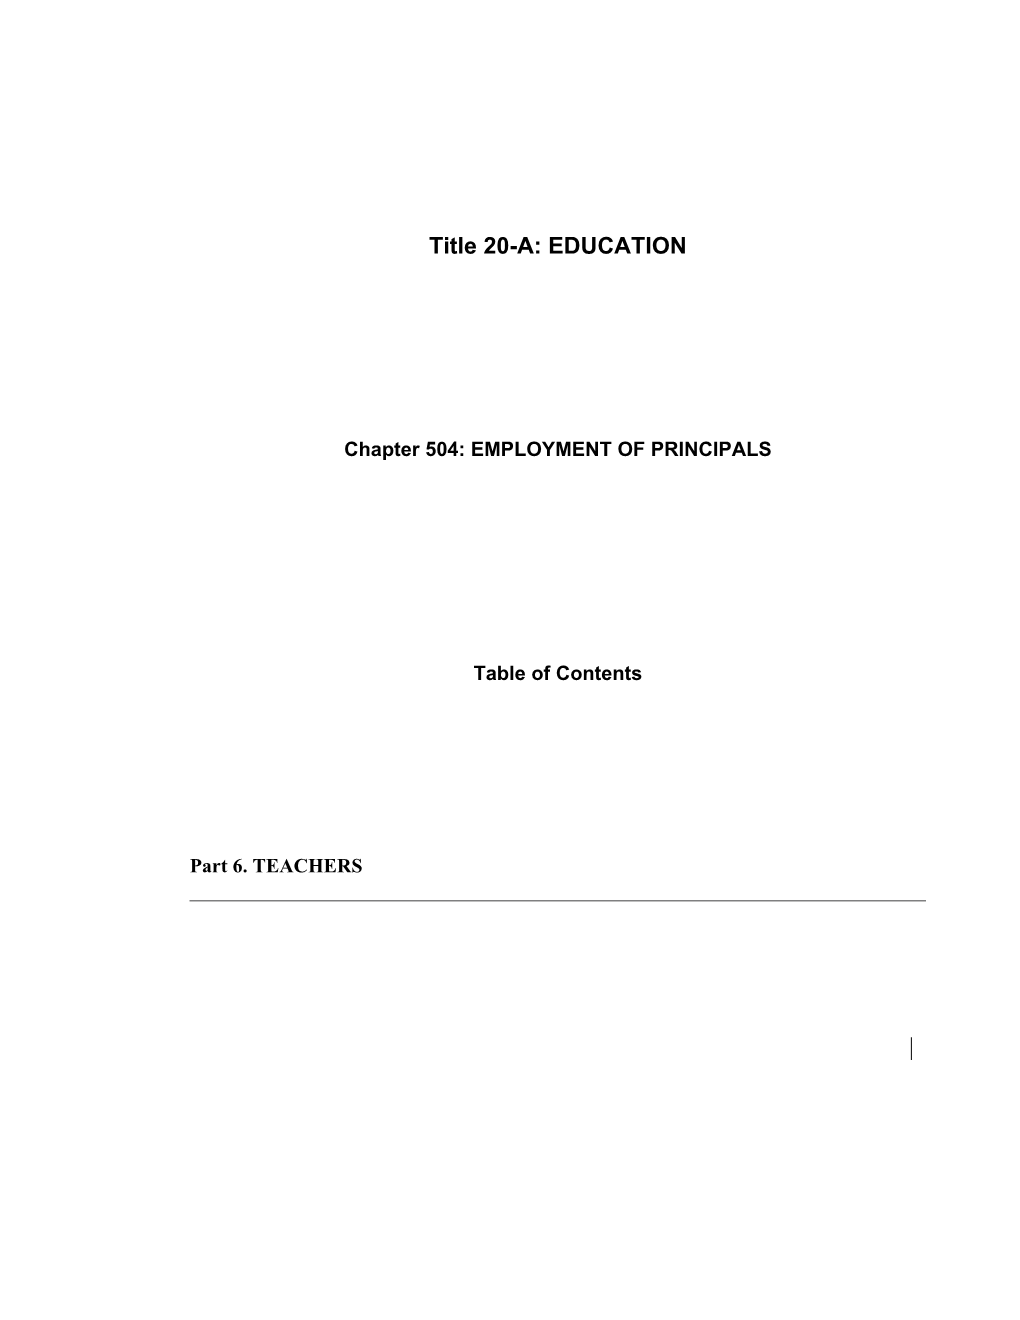 MRS Title 20-A, Chapter504: EMPLOYMENT of PRINCIPALS